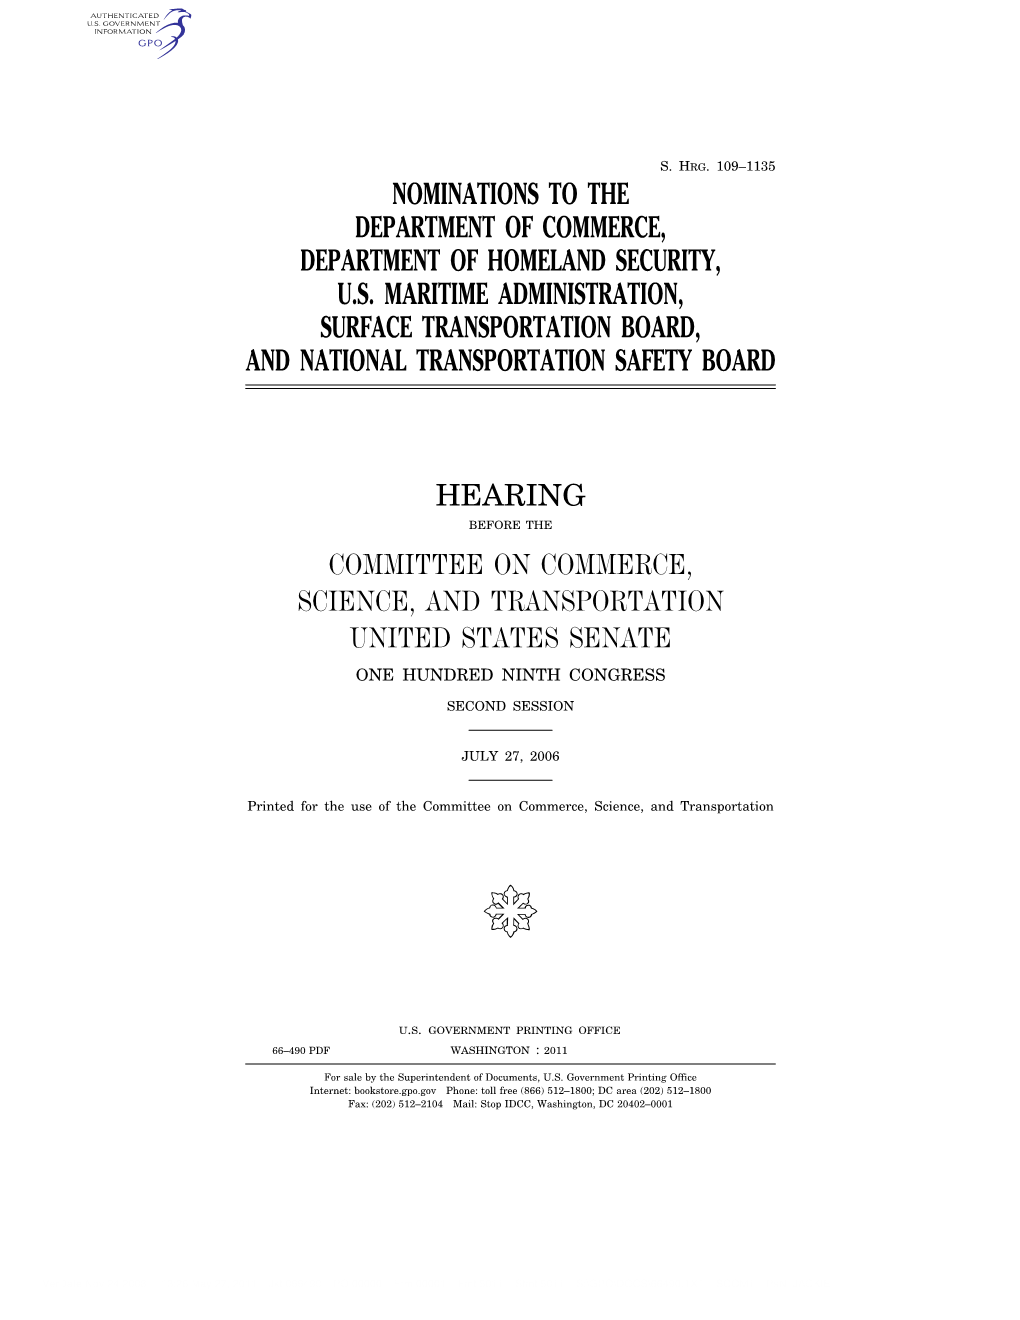 Nominations to the Department of Commerce, Department of Homeland Security, U.S